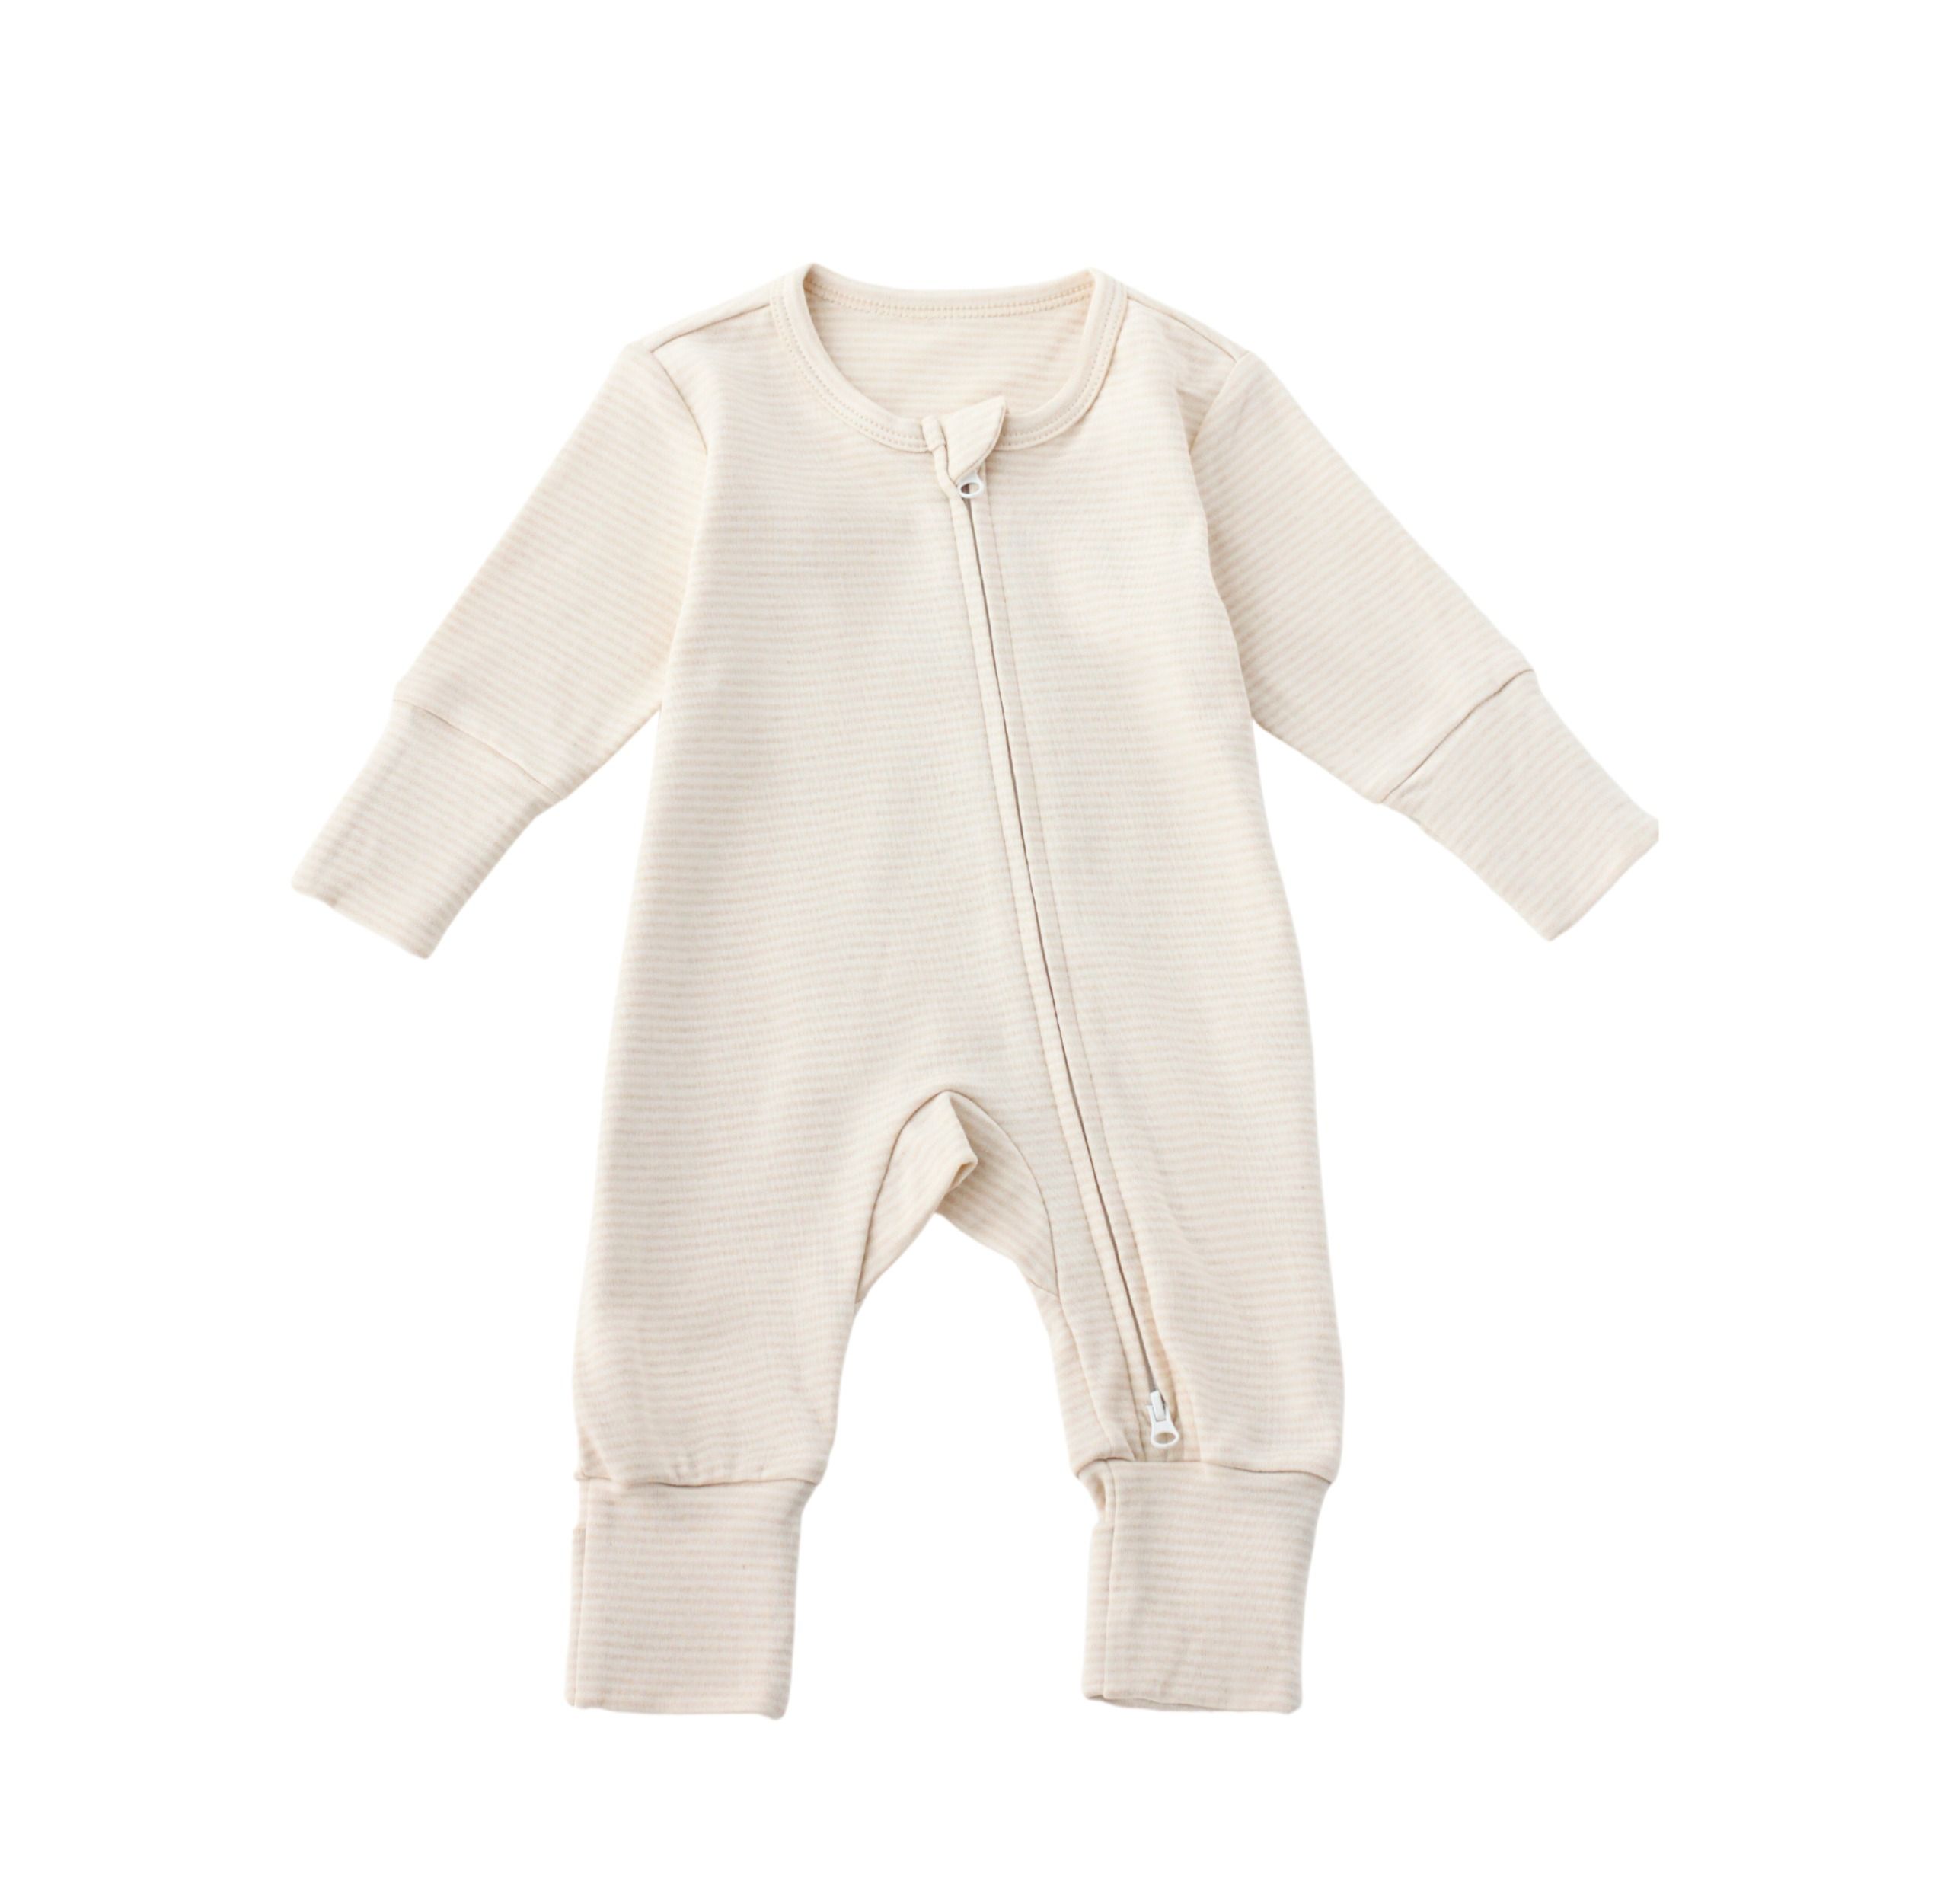 Light Brown -  Twinkle Planet Organic Onepiece Pjyamas -Purely Natural